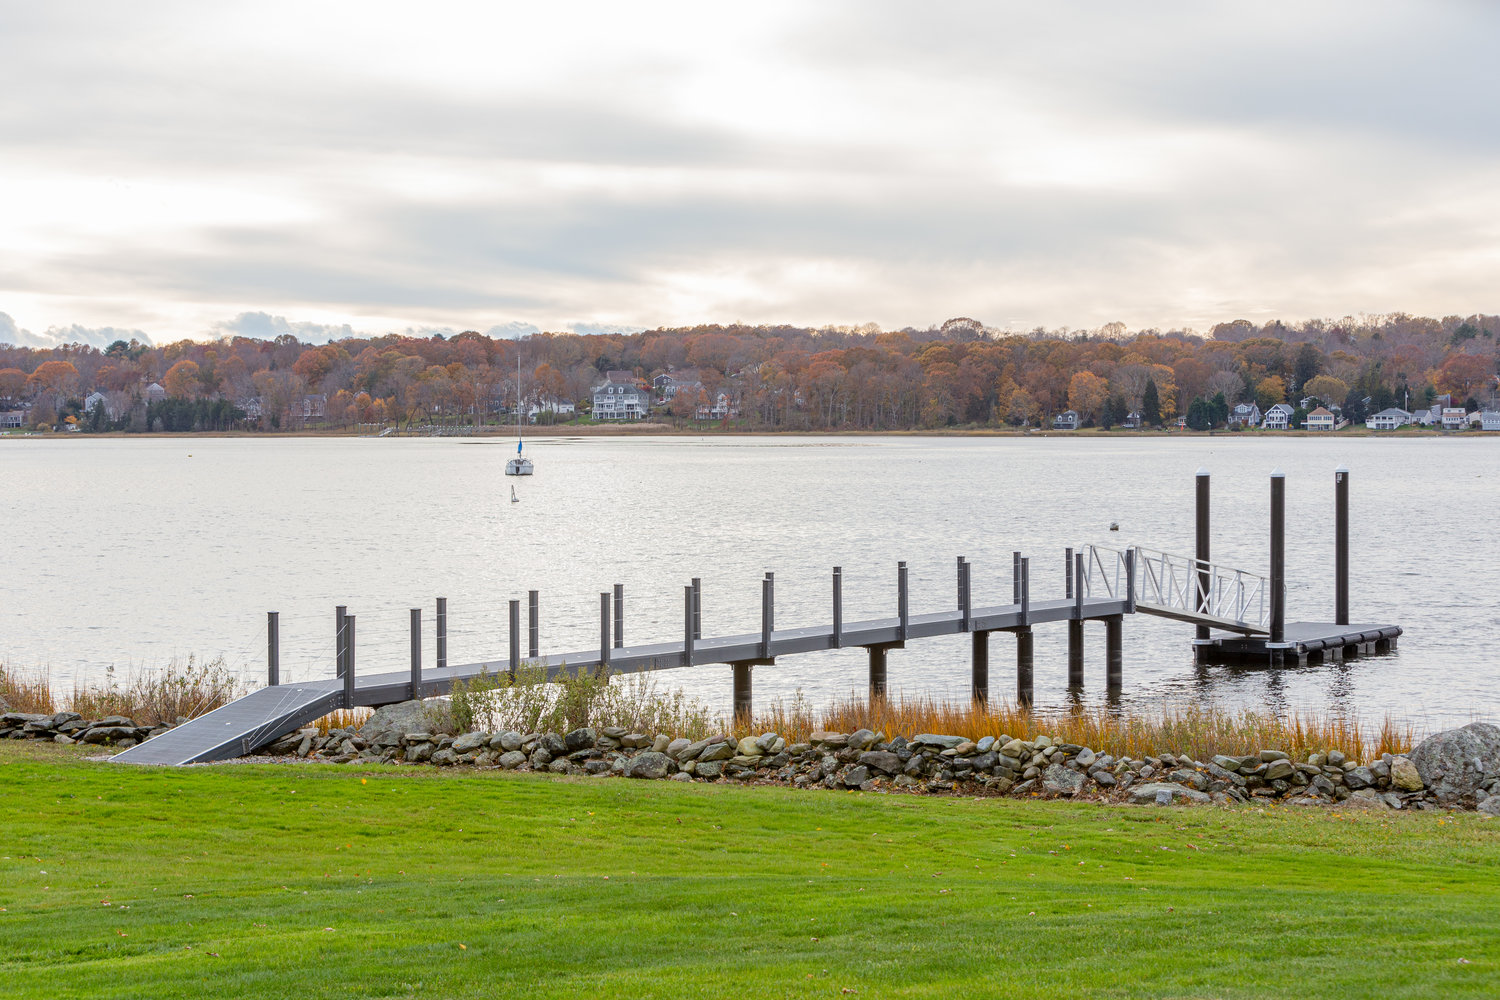 This dock off the western shore of the Touisset peninsula in Warren is the first in Rhode Island constructed of 100 percent composite materials. Pilings, decking and rails are all made of lightweight composite materials.